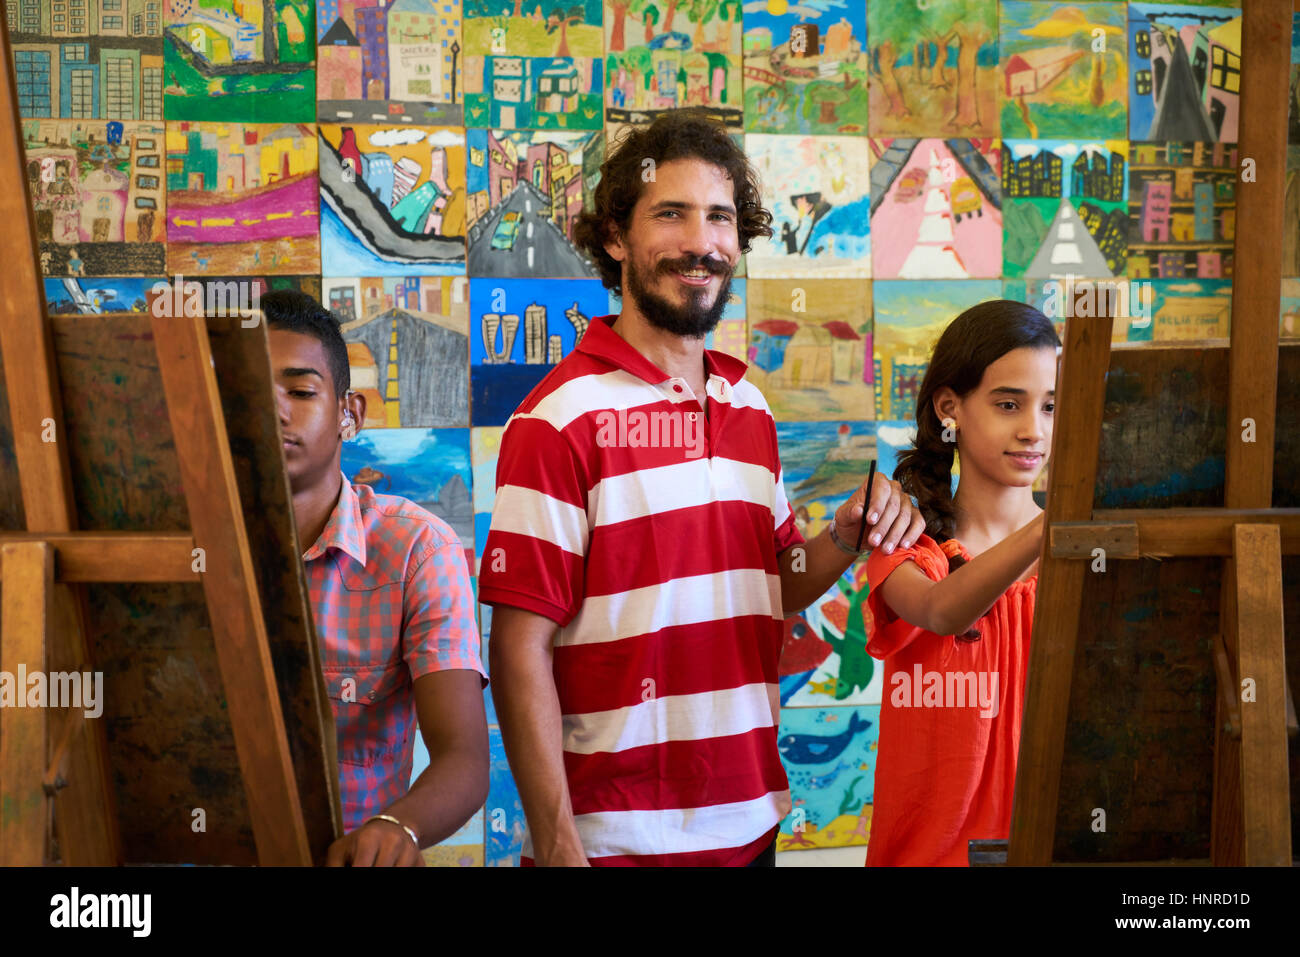 School of art, college of arts, education for group of young students. Portraif of happy latino professor smiling, man working as teacher and looking  Stock Photo